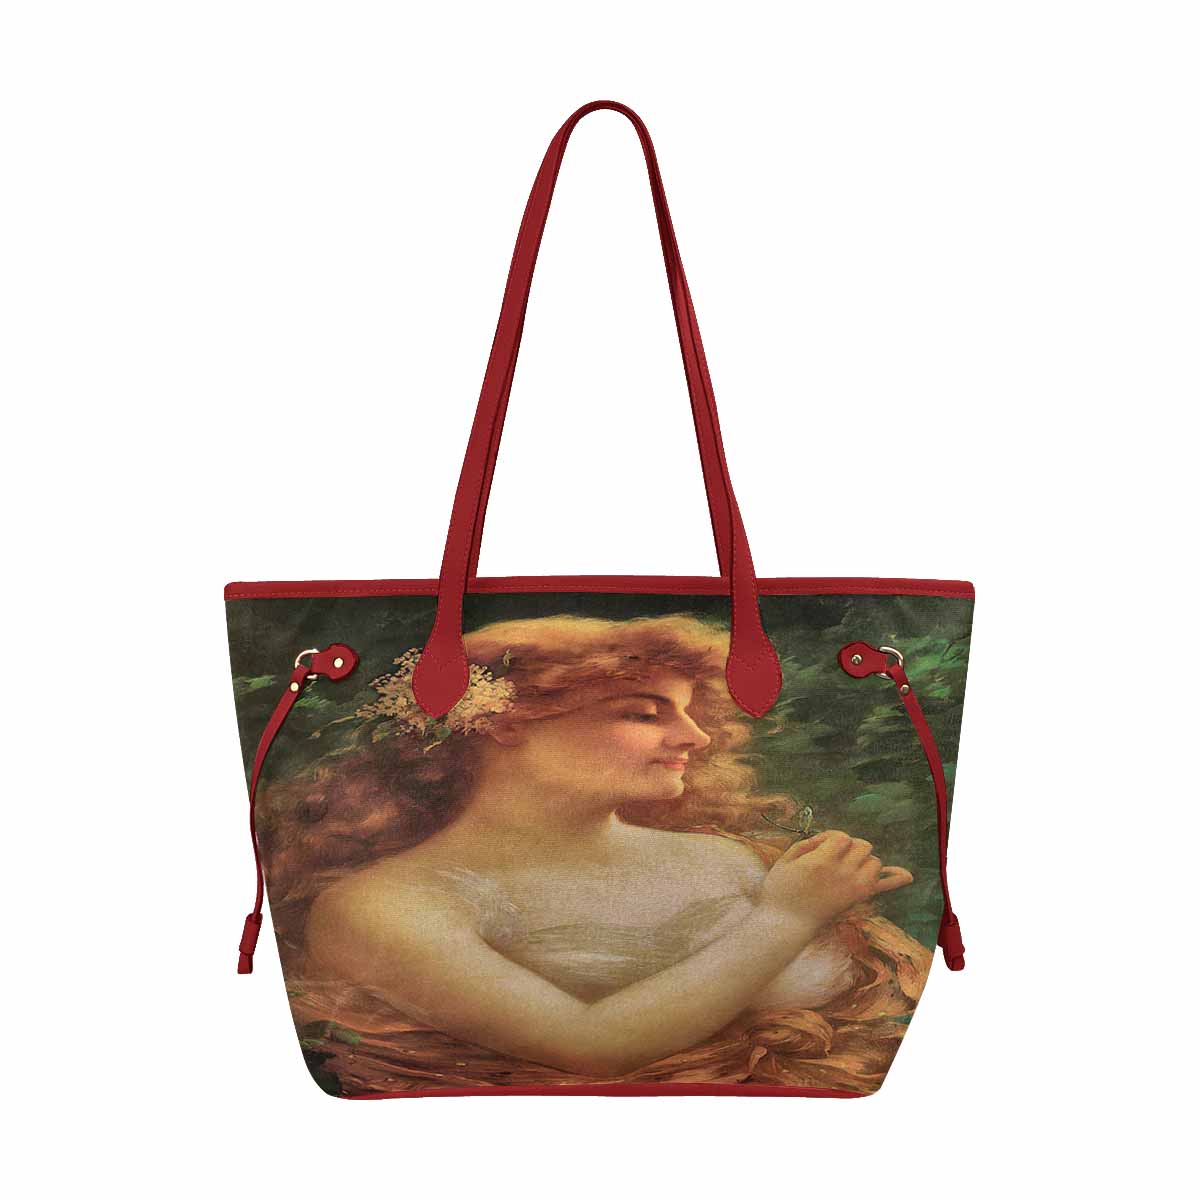 Victorian Lady Design Handbag,, Model 1695361, Young Woman With A Dragonfly, RED TRIM